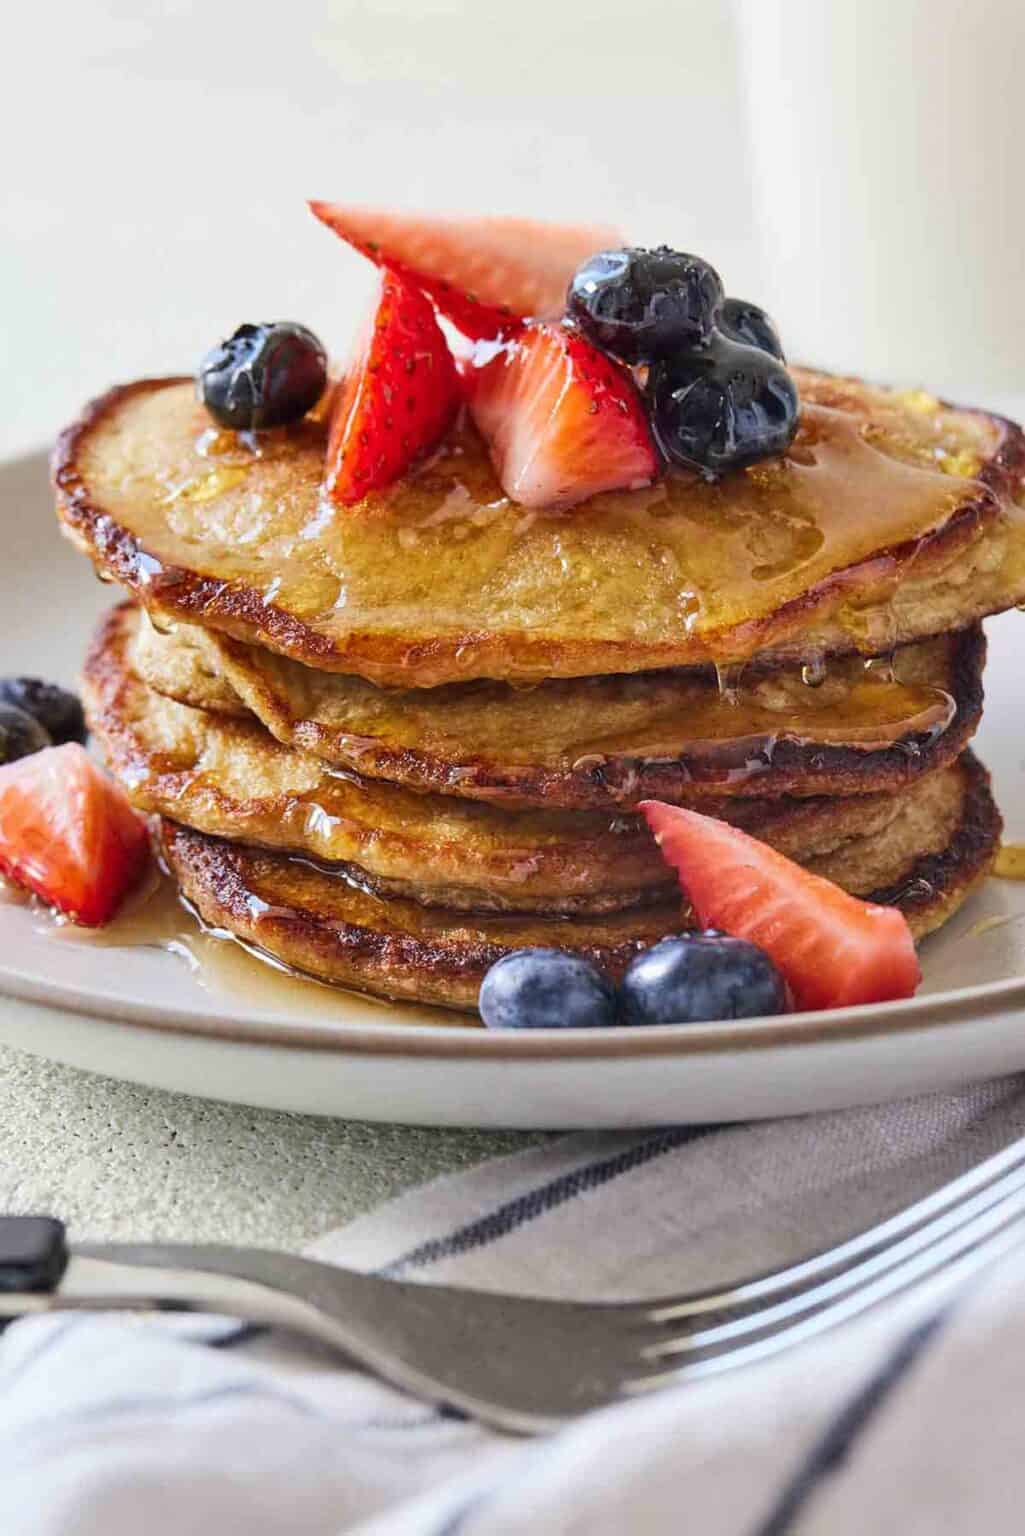 Oatmeal Banana Pancakes - Cooking With Coit